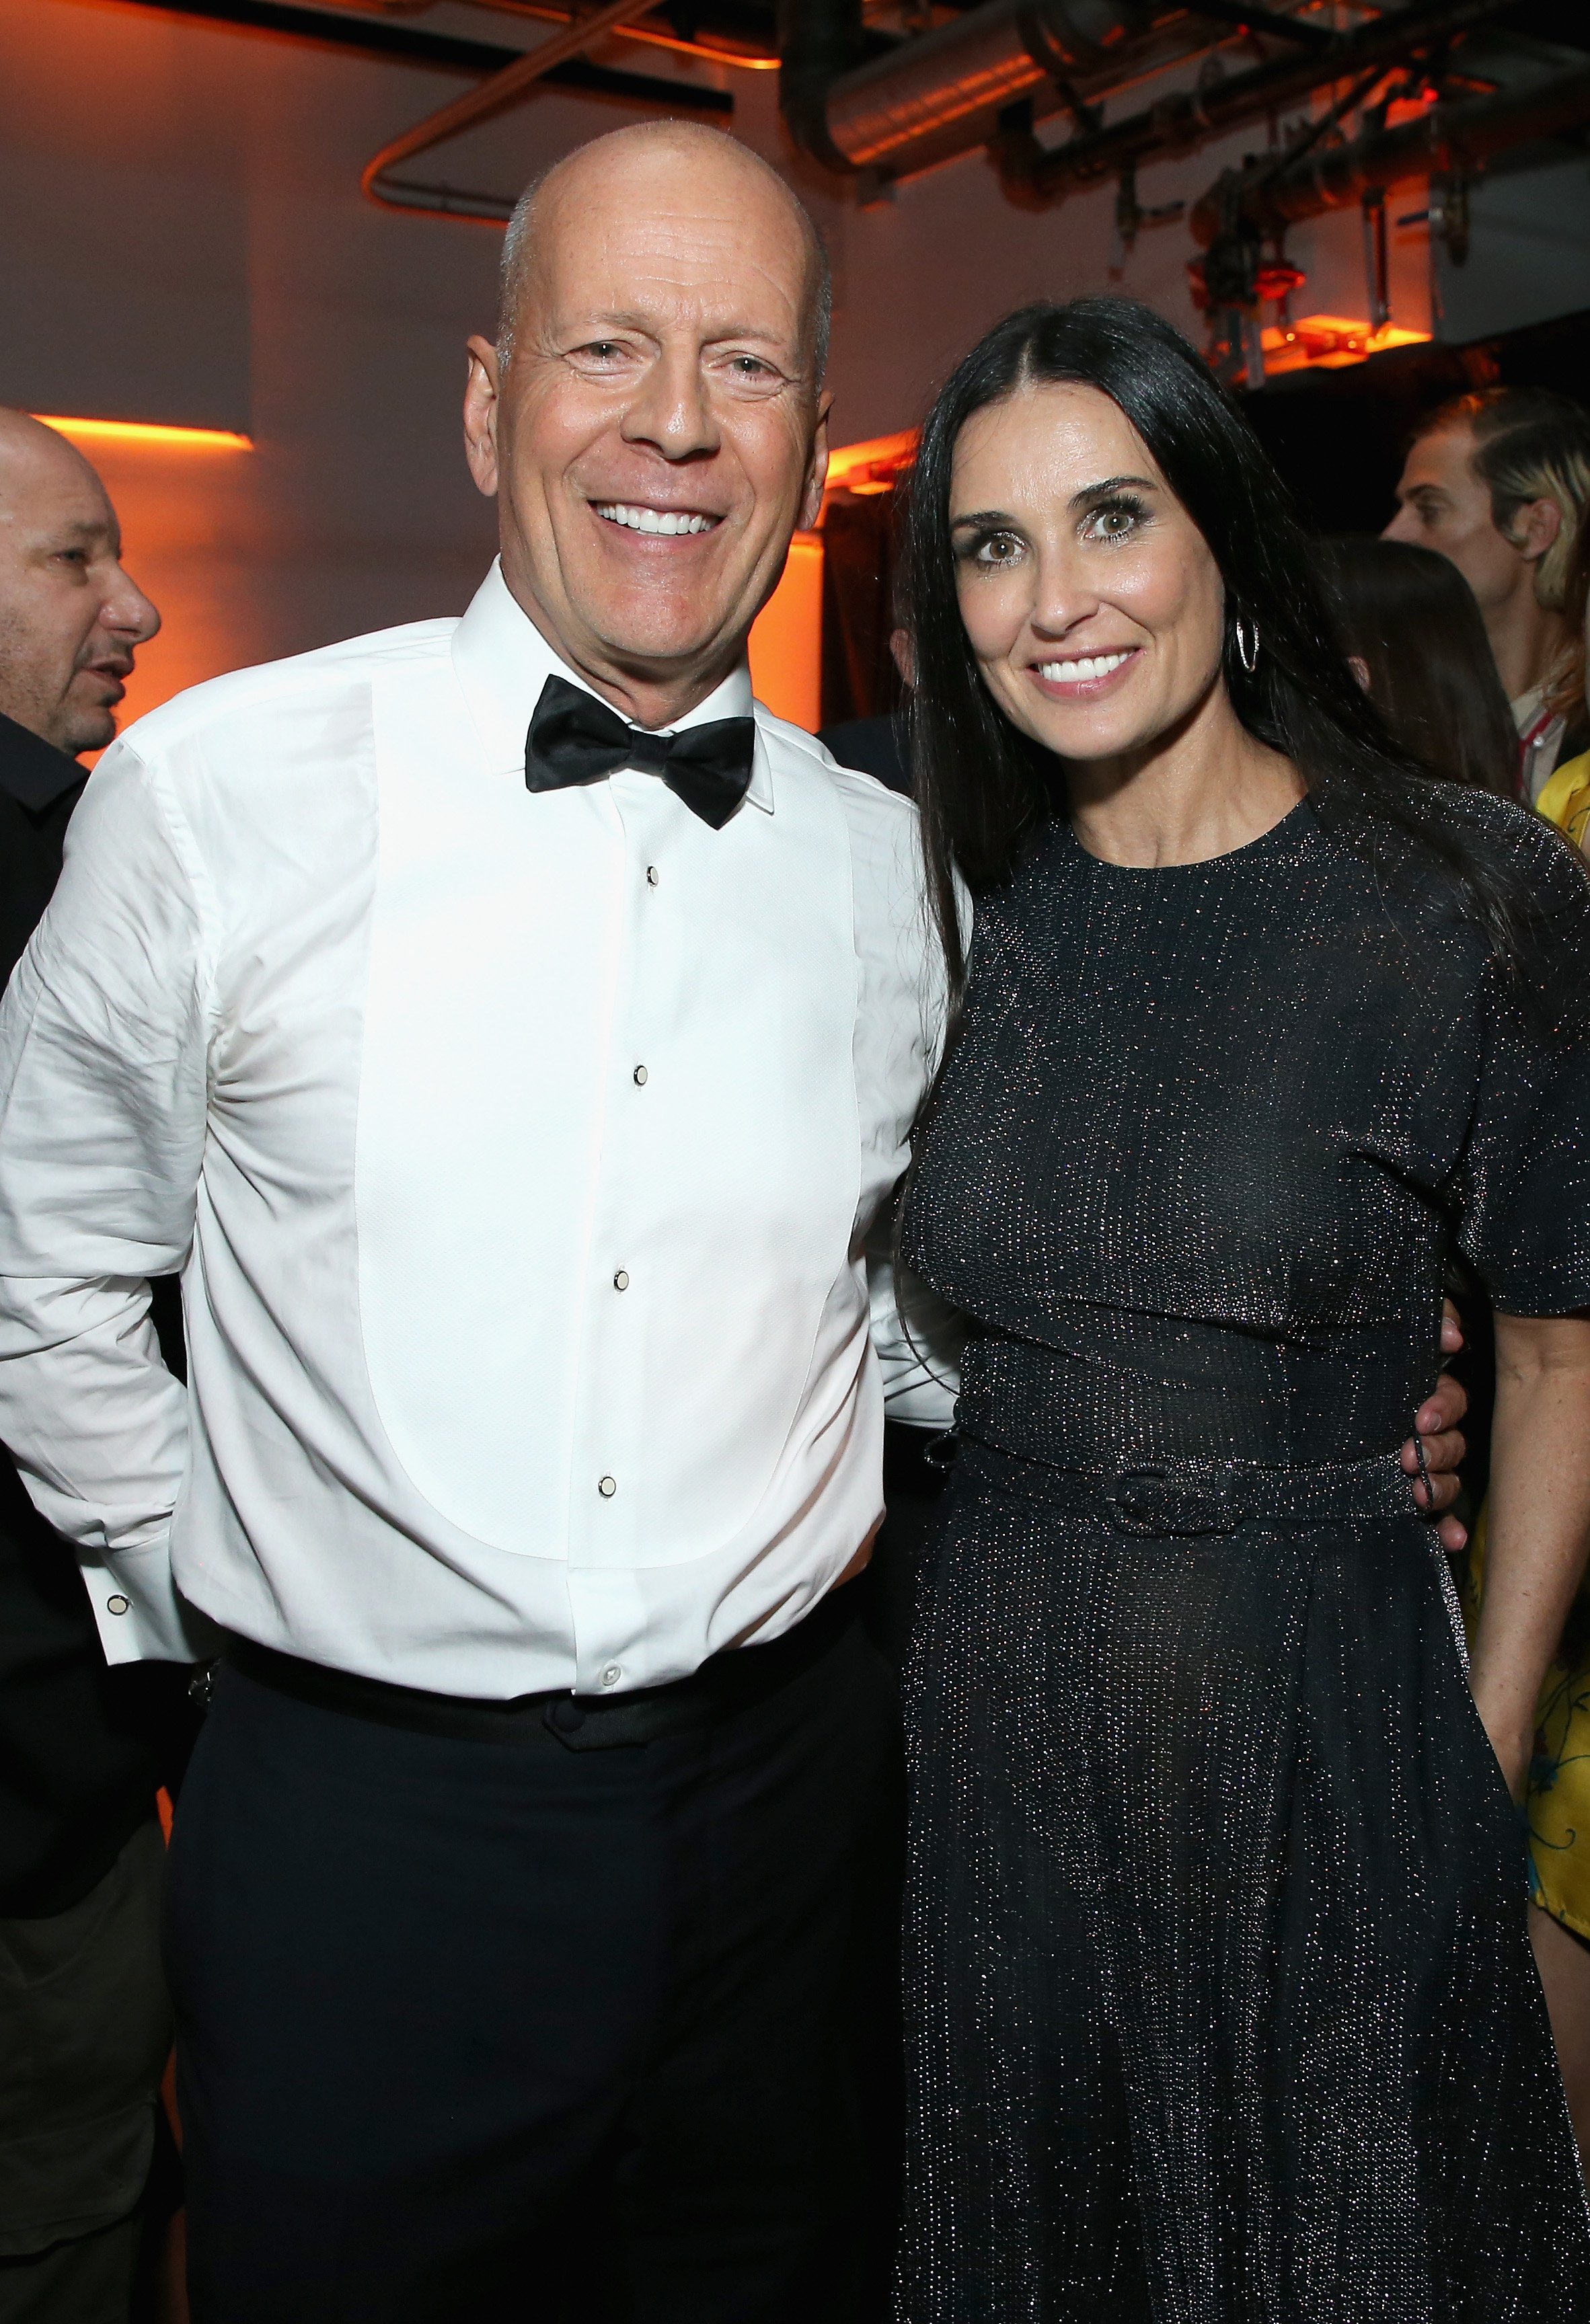  Bruce Willis and Demi Moore attend the after party for the Comedy Central Roast of Bruce Willis at NeueHouse on July 14, 2018 | Photo: Getty Images